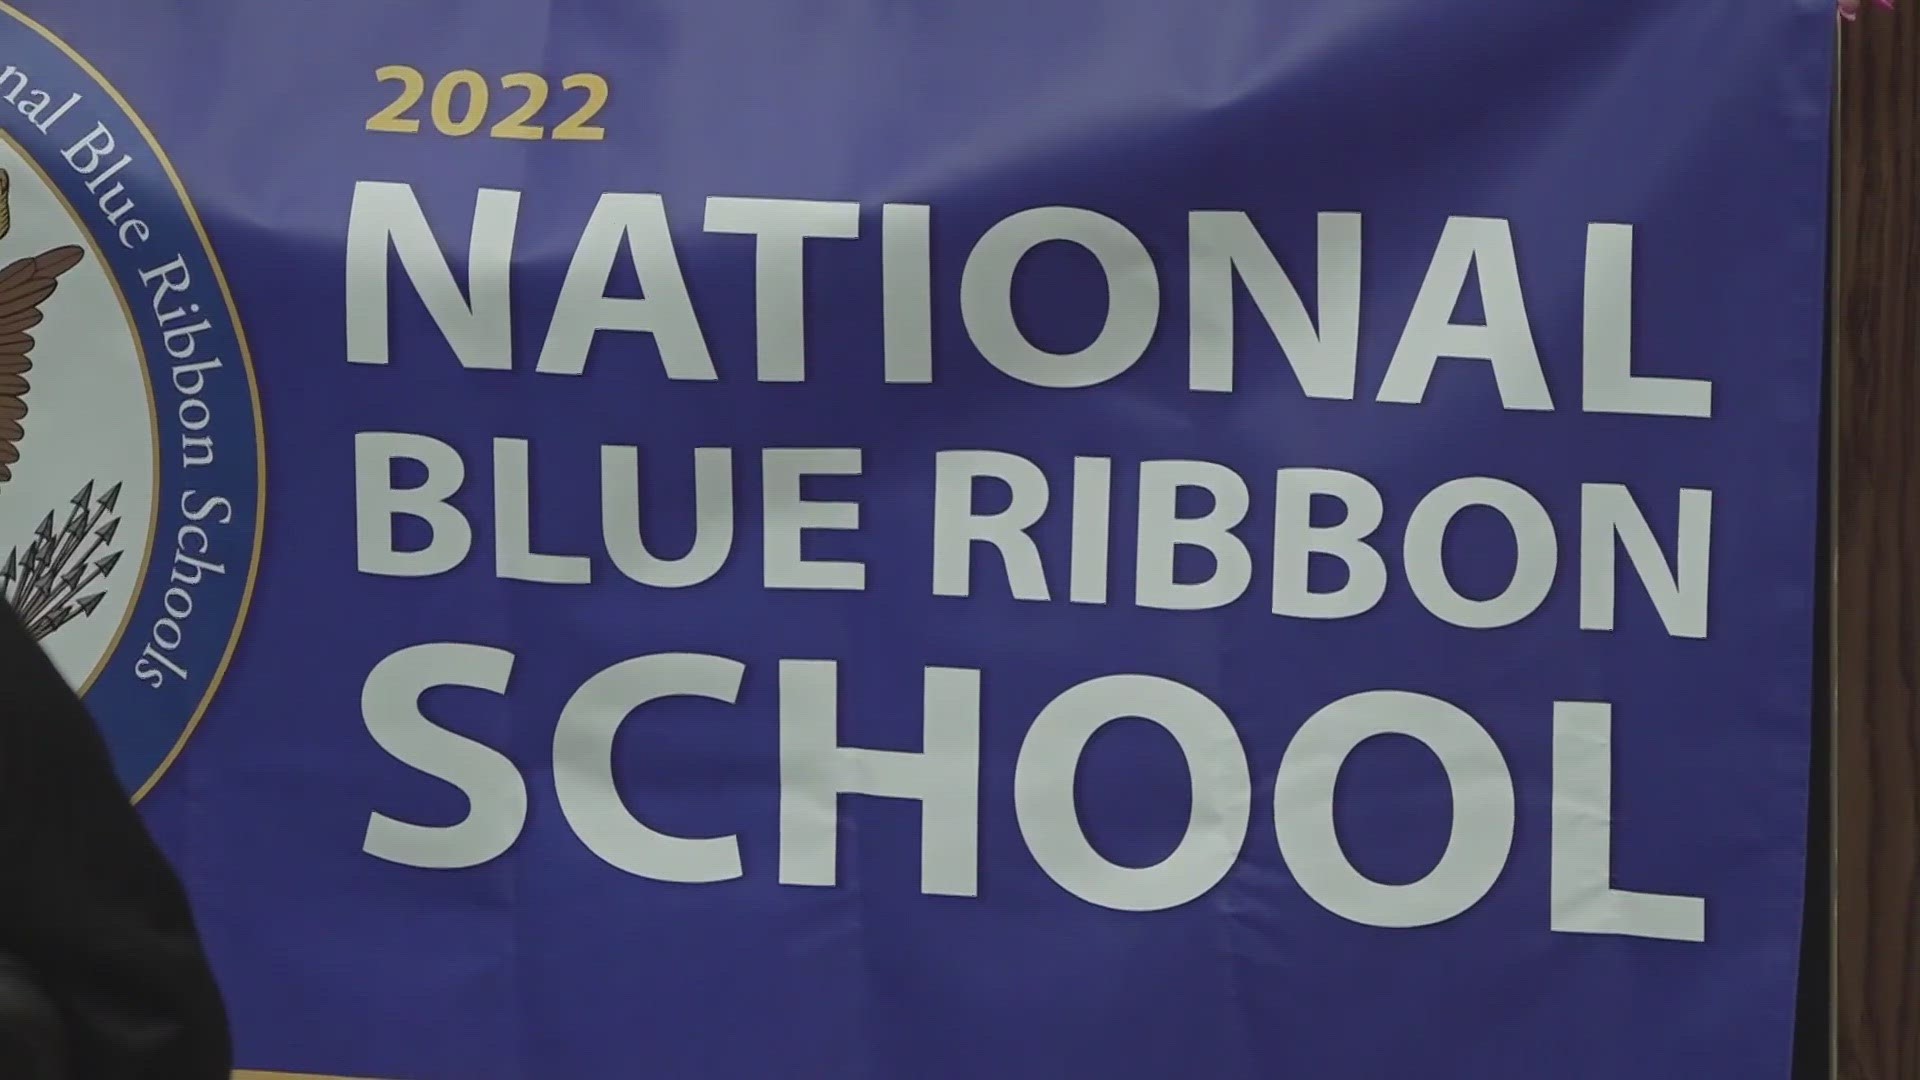 Blue Ribbon Schools are awarded based on overall academic excellence or their progress in closing achievement gaps in student subgroups.